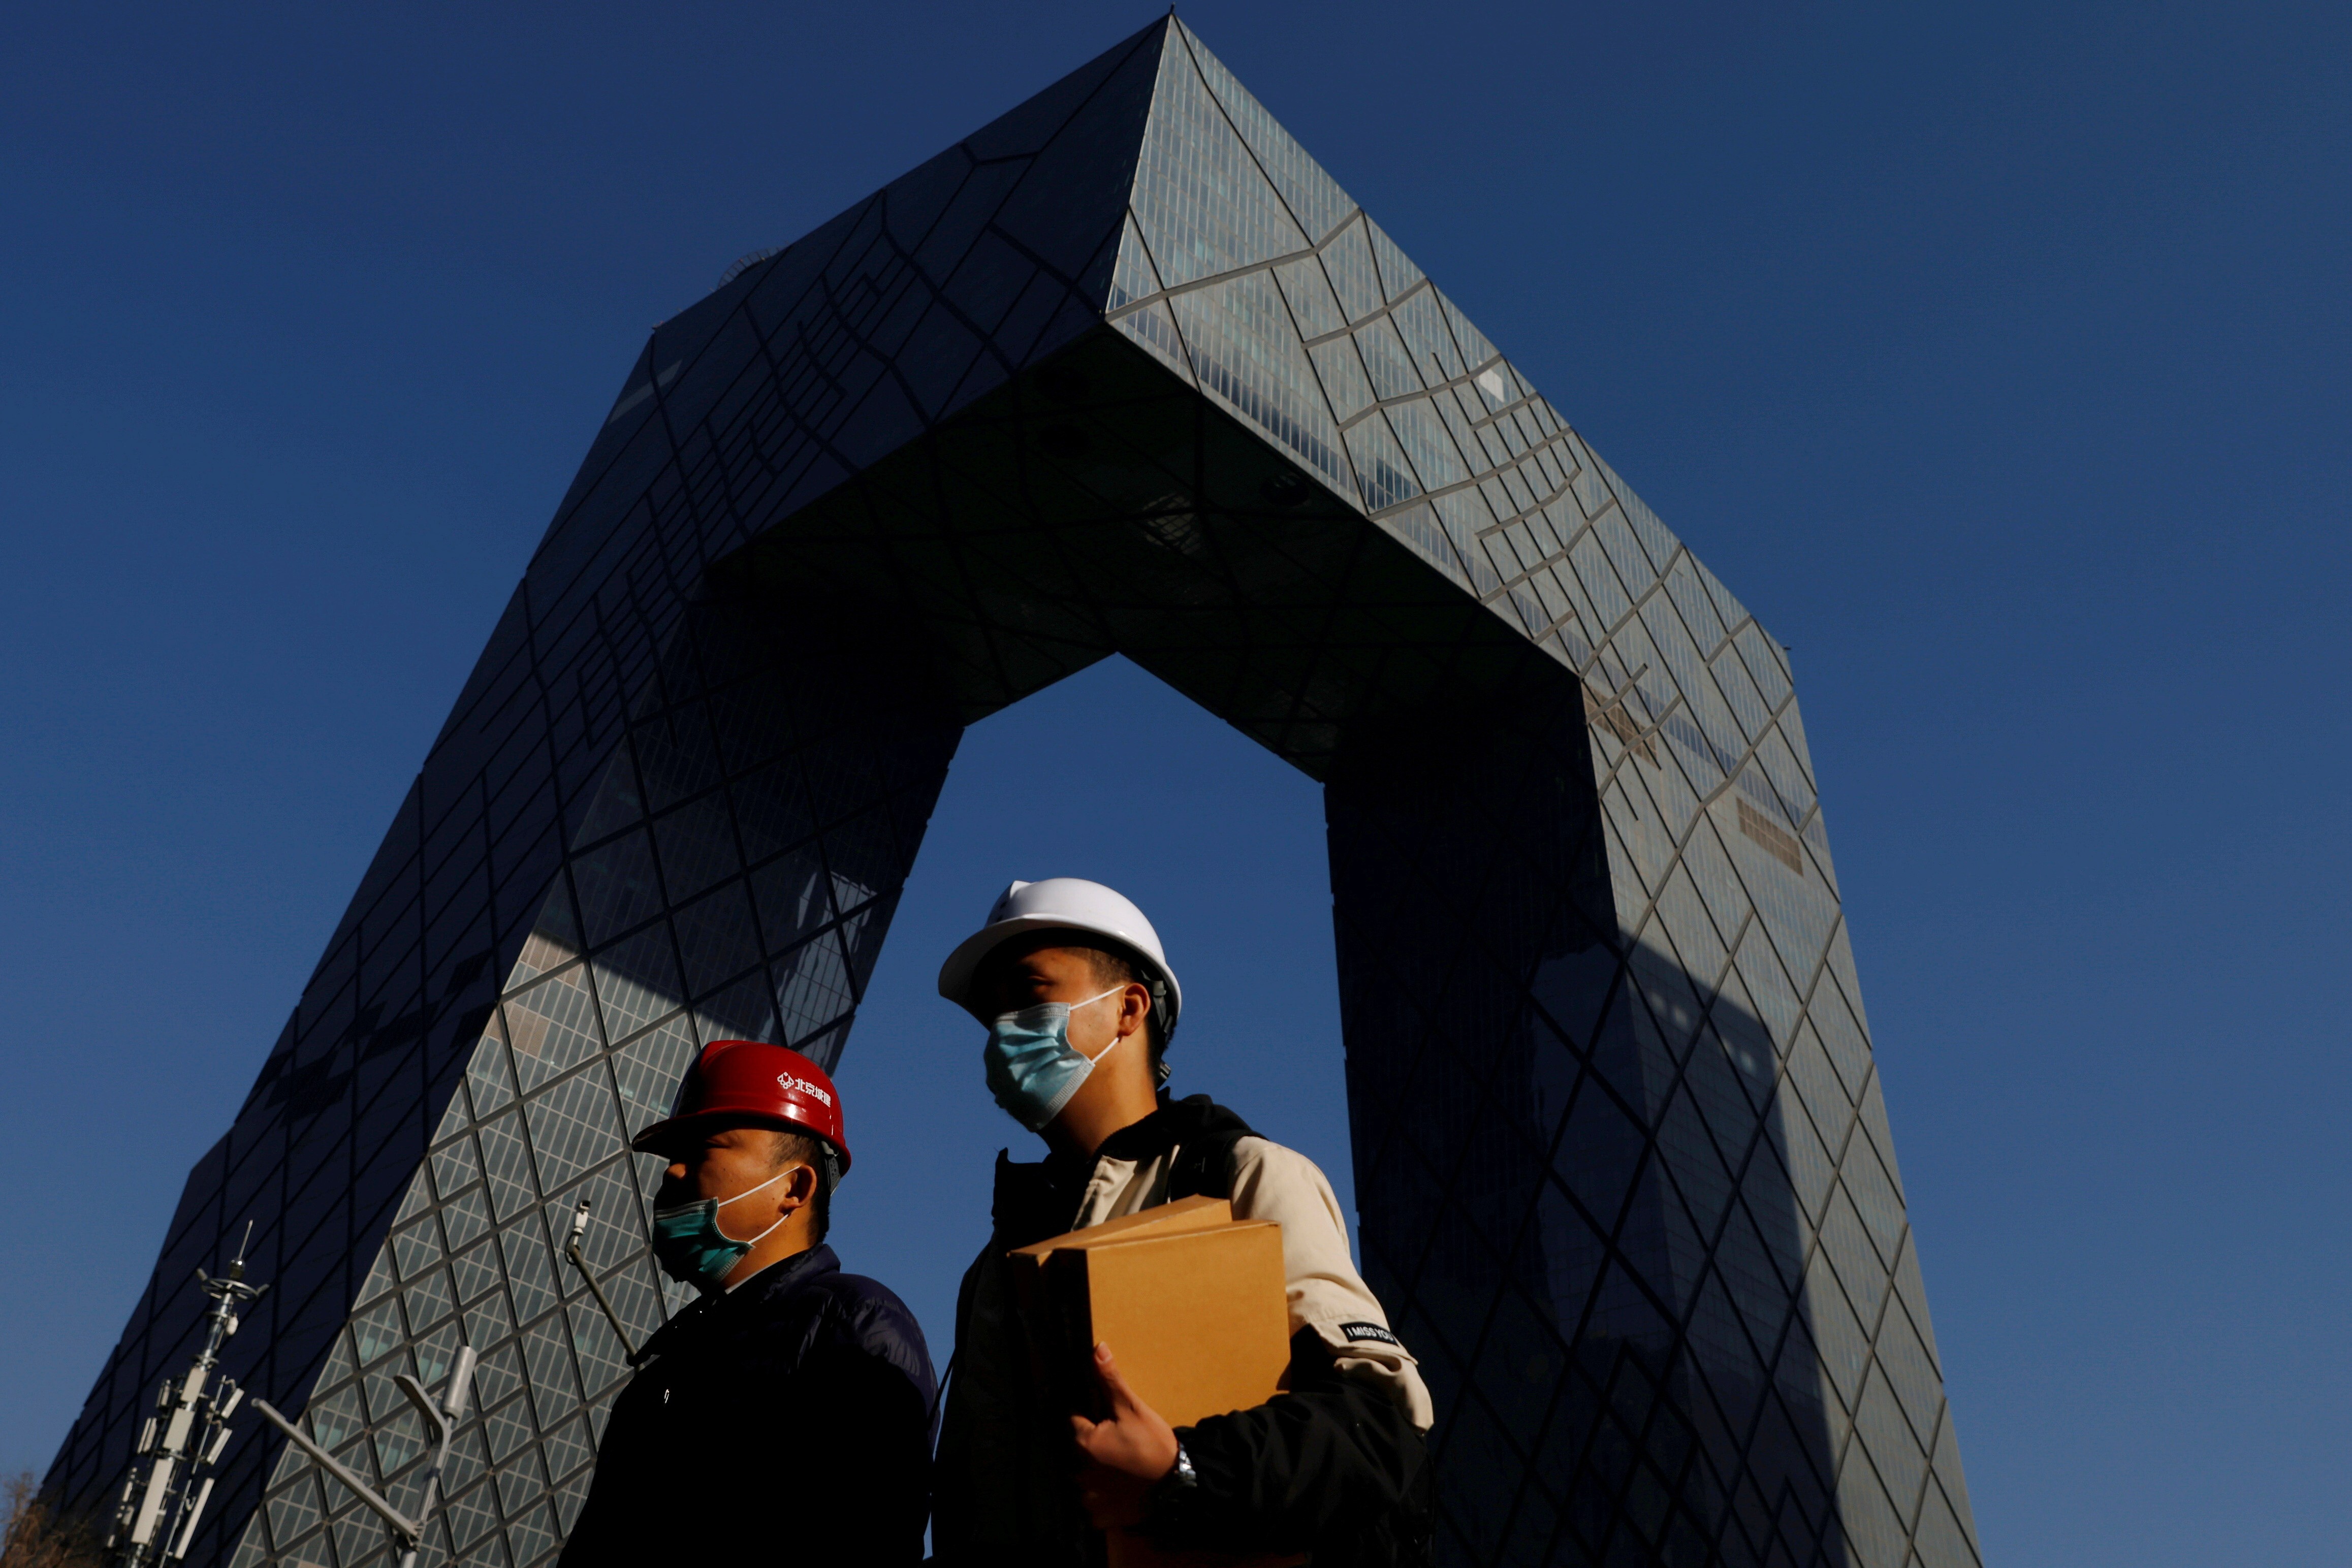 People walk past the CCTV headquarters, home of the Chinese state media outlet and its English-language sister channel CGTN, in Beijing in February. Photo: Reuters